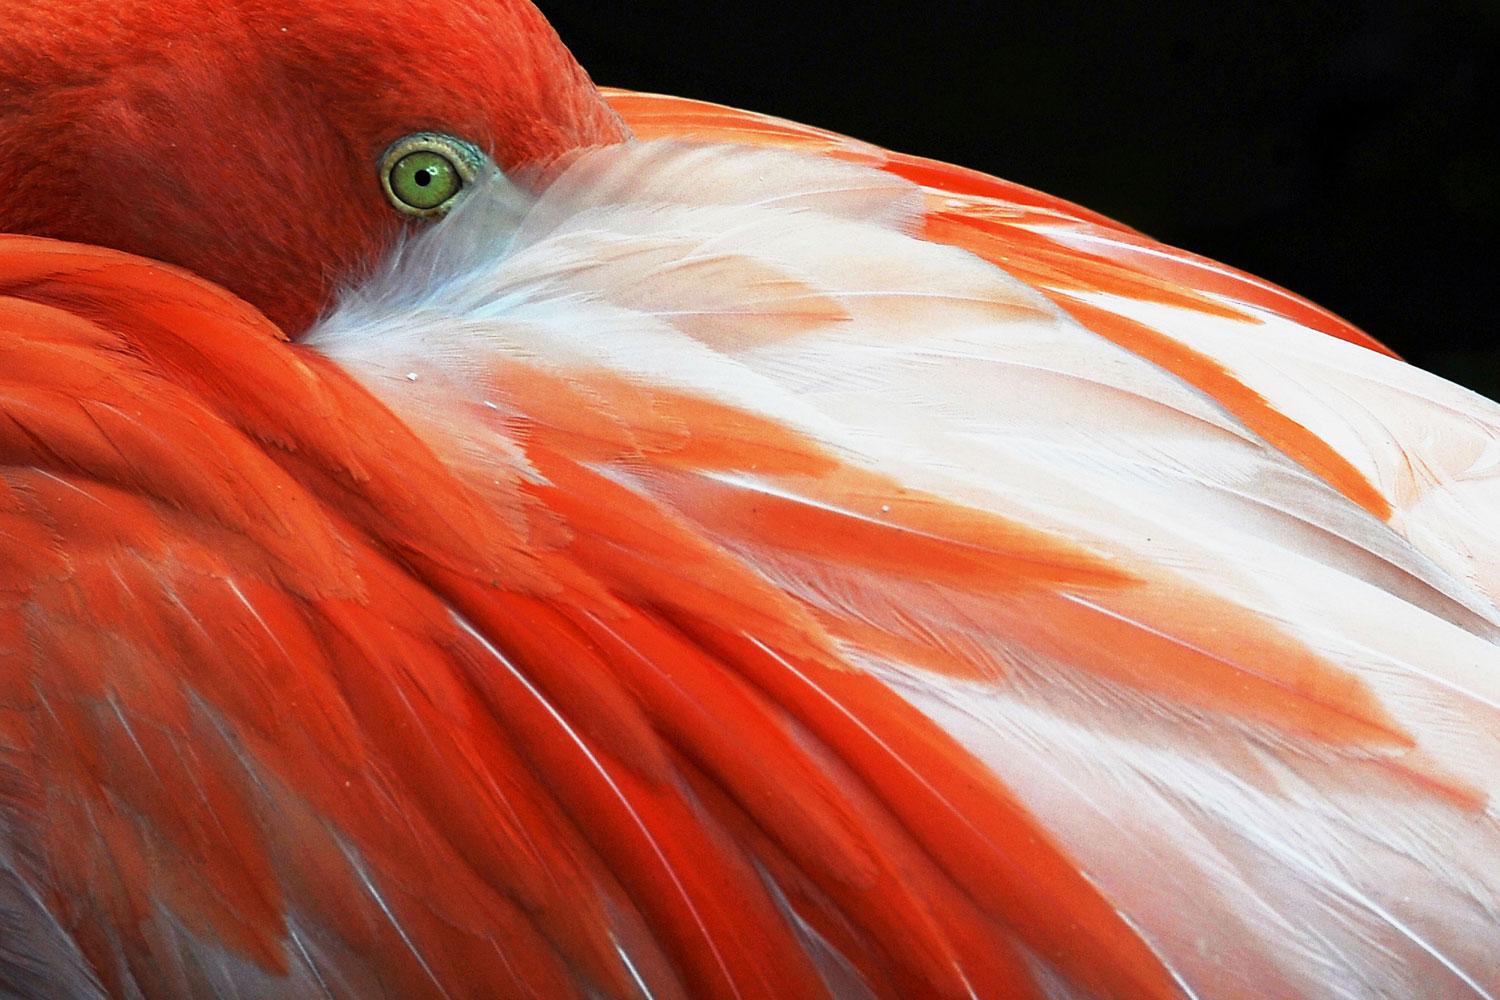 A pink flamingo is pictured at the zoo in Cali, Valle del Cauca department, Colombia, July 13, 2011.